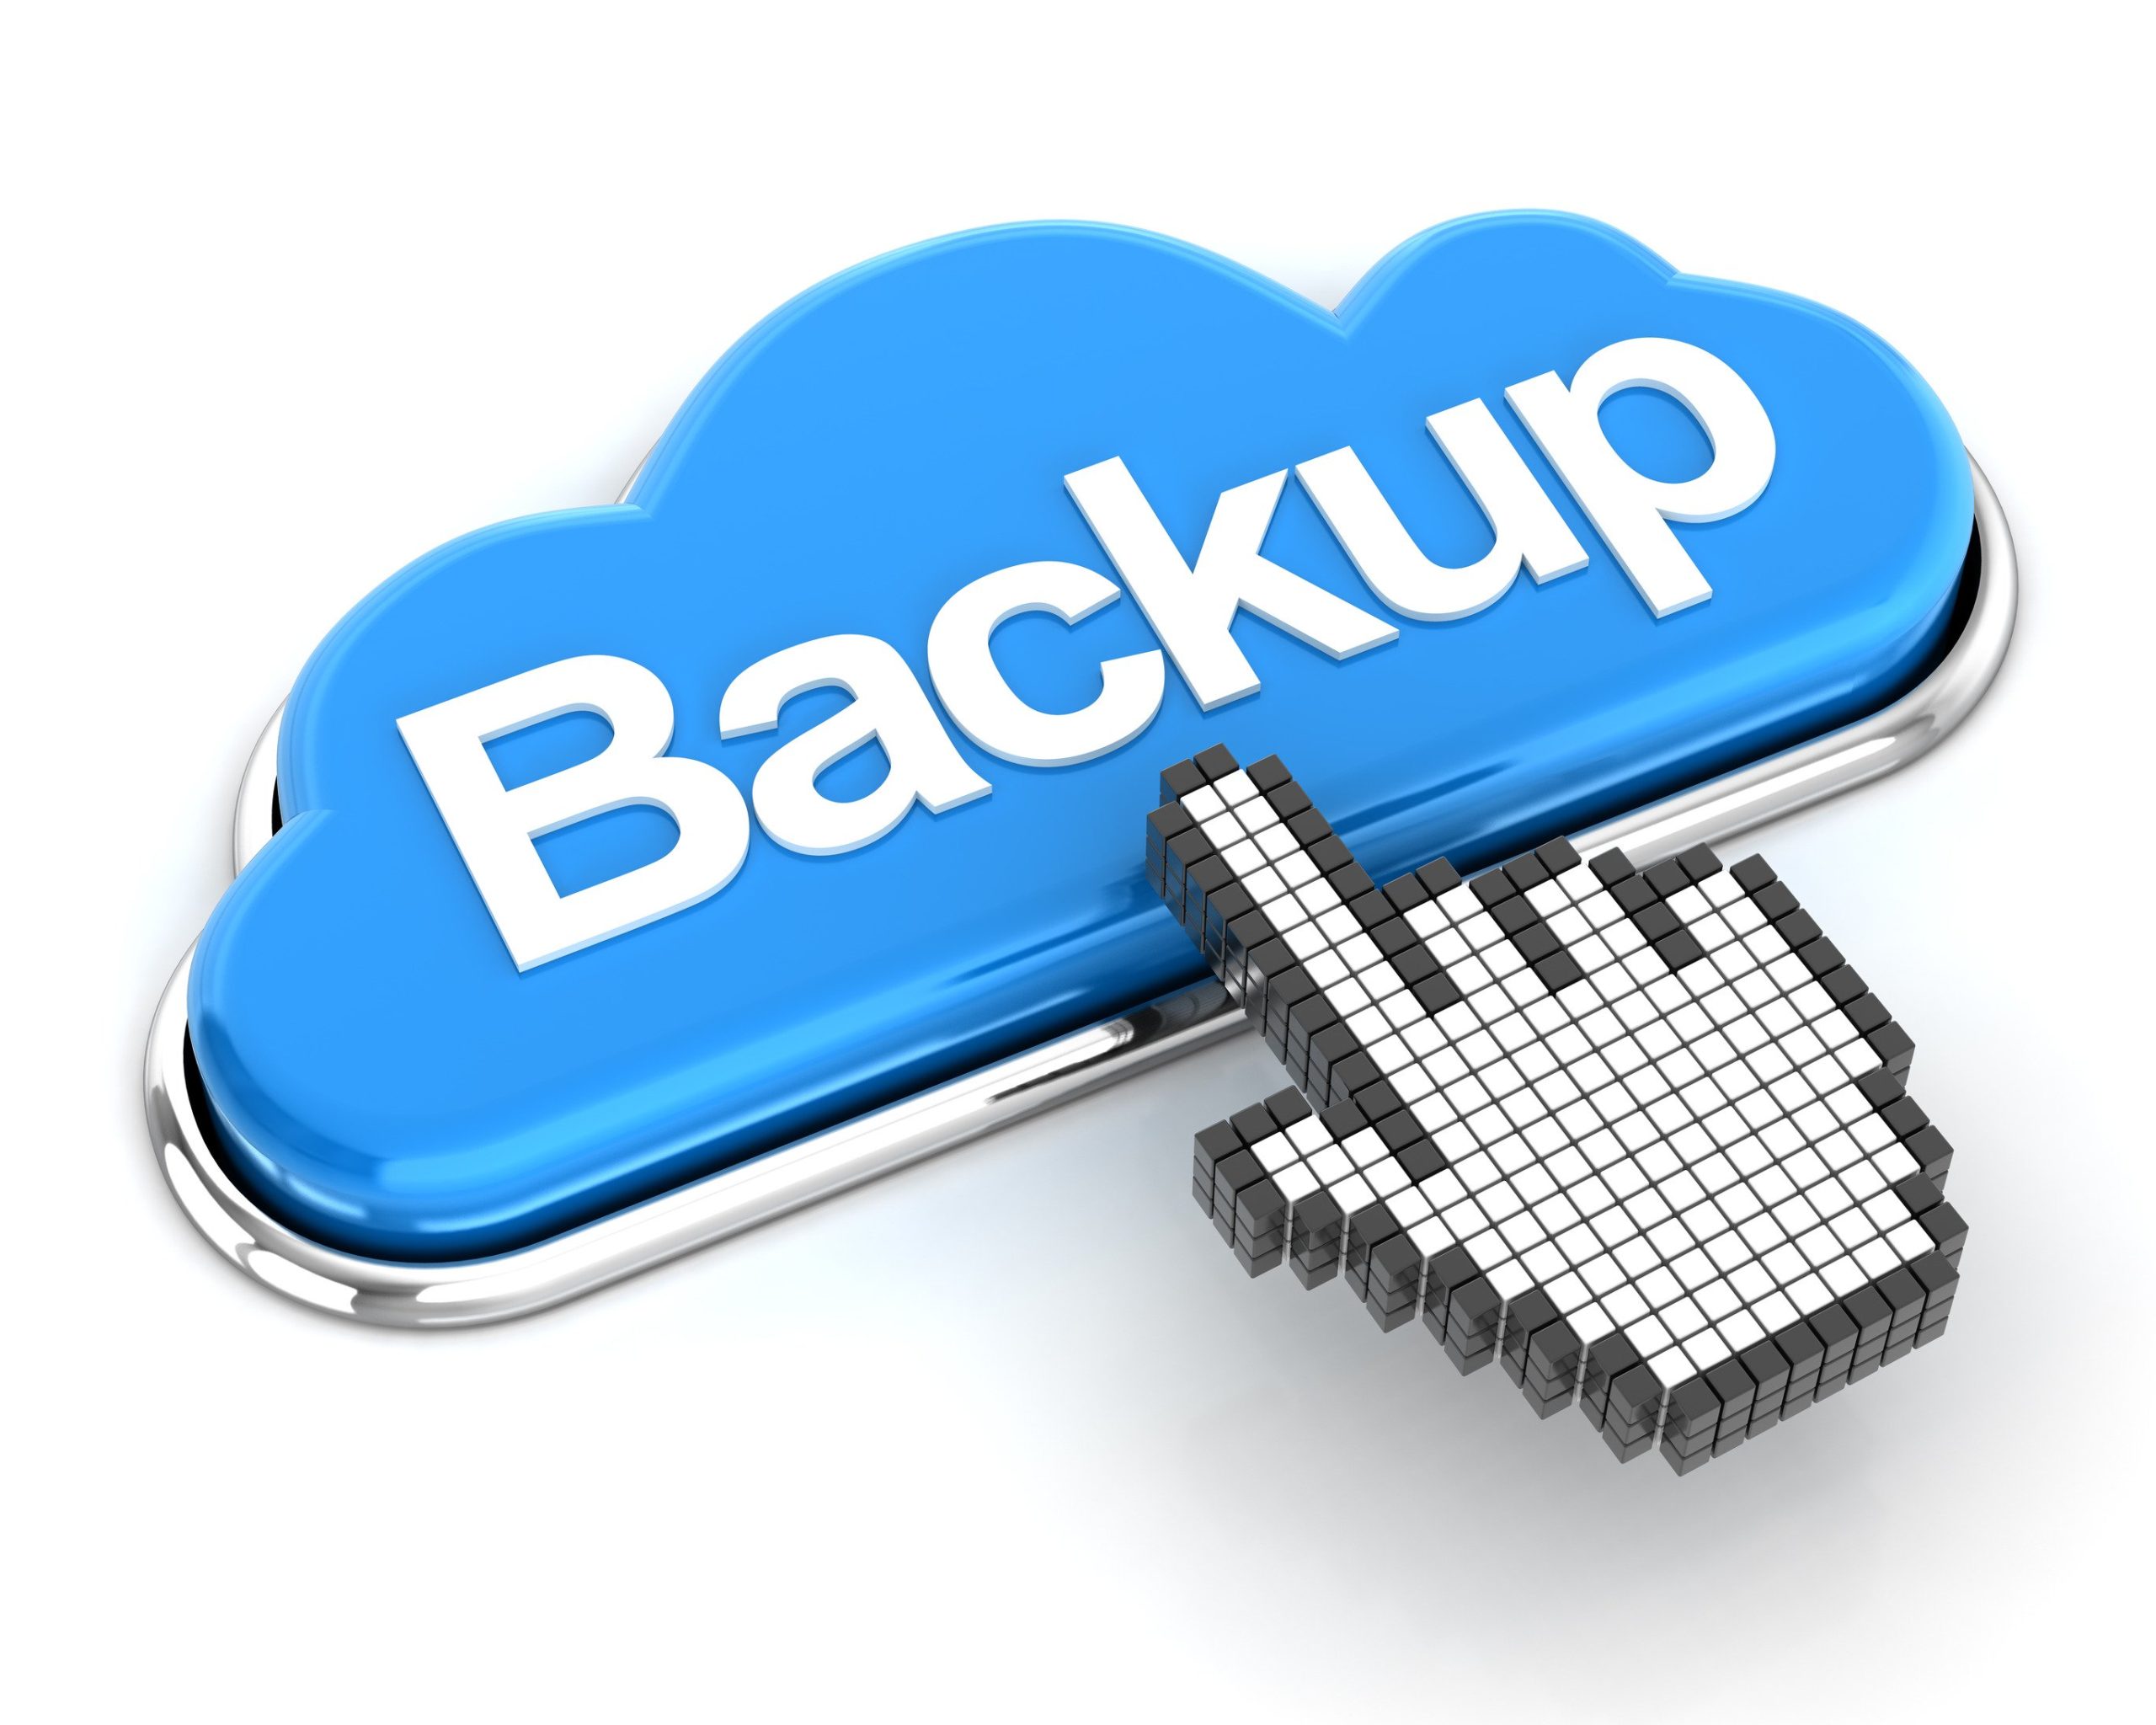 A 3D rendering of a blue cloud with the word BACKUP on it. A hand cursor is hovering over the cloud.